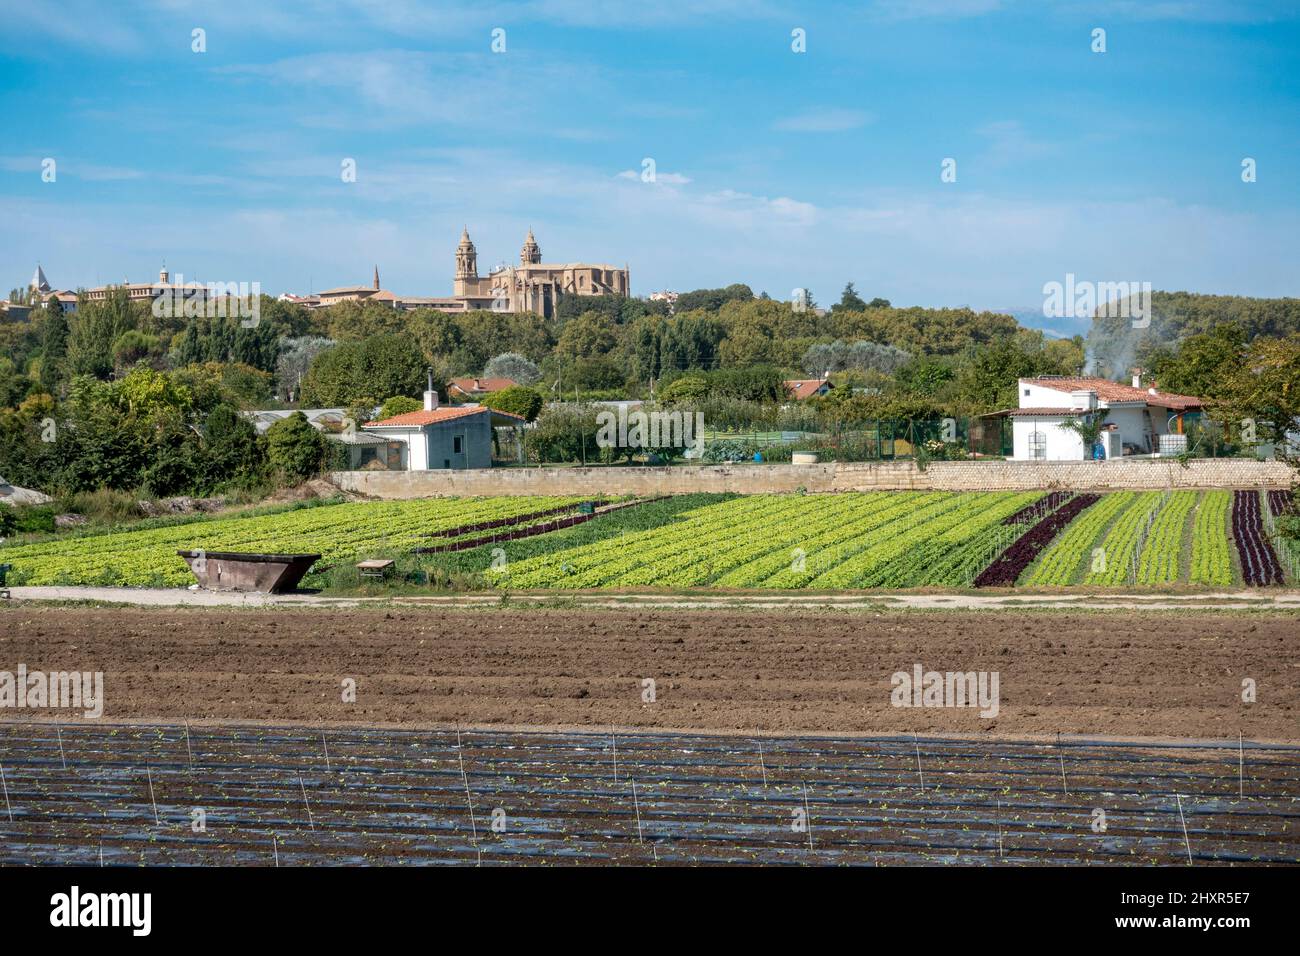 View across a small salad farm towards Pamplona with Pamplona Cathedral in the distance in Navarre, Spain Stock Photo